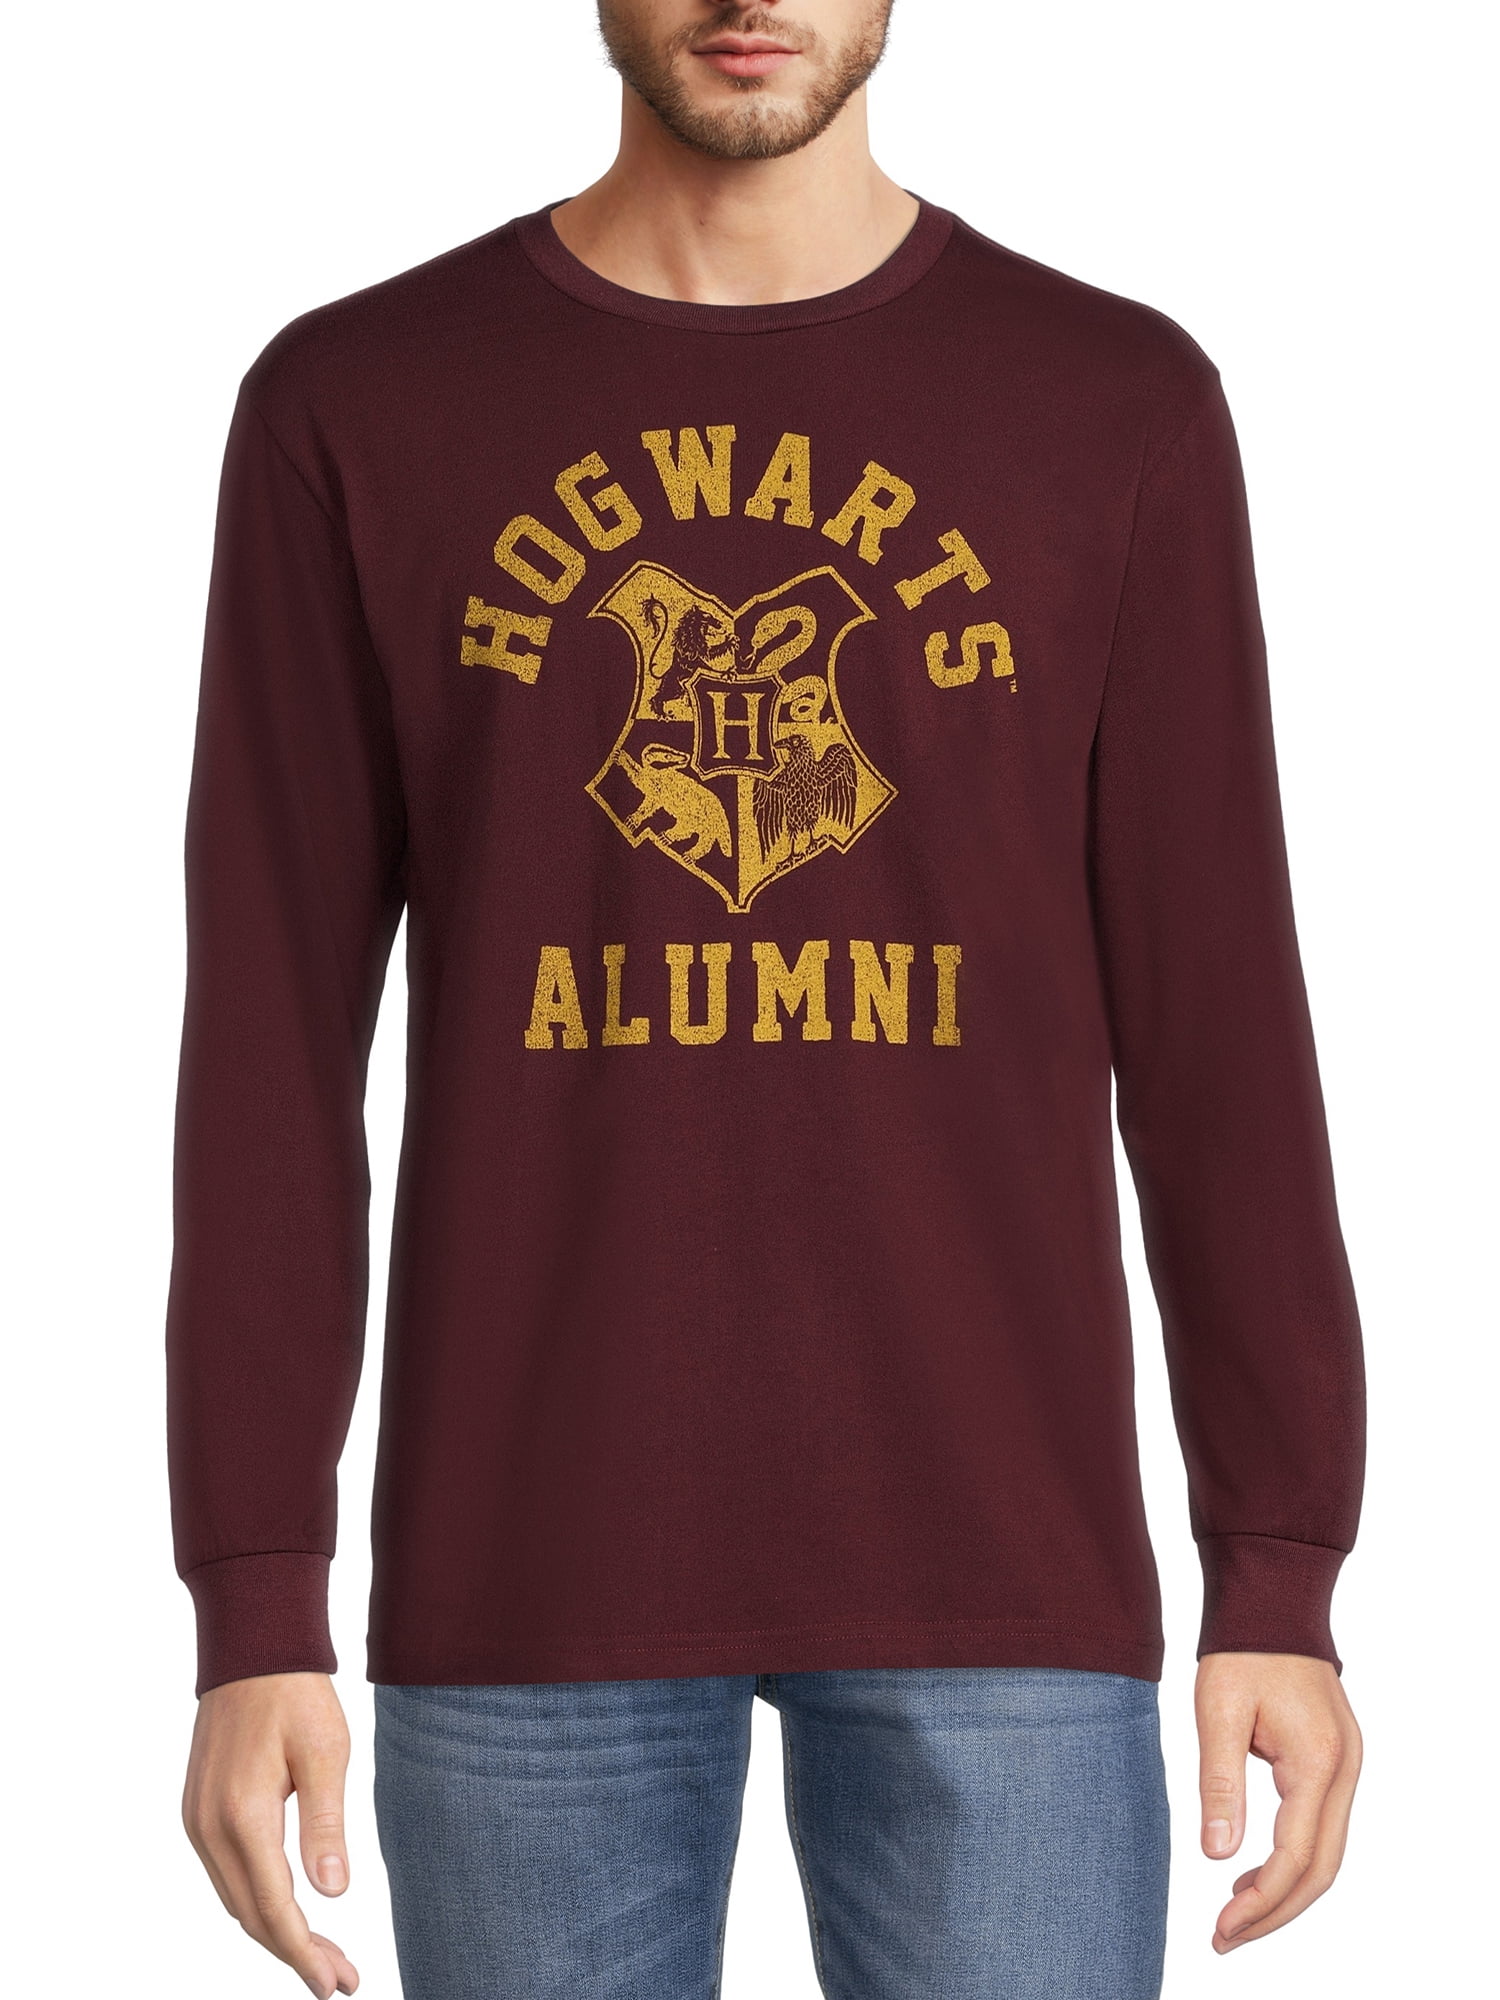 Harry Potter Men's Hogwarts Alumni Graphic T-Shirt with Long Sleeves ...